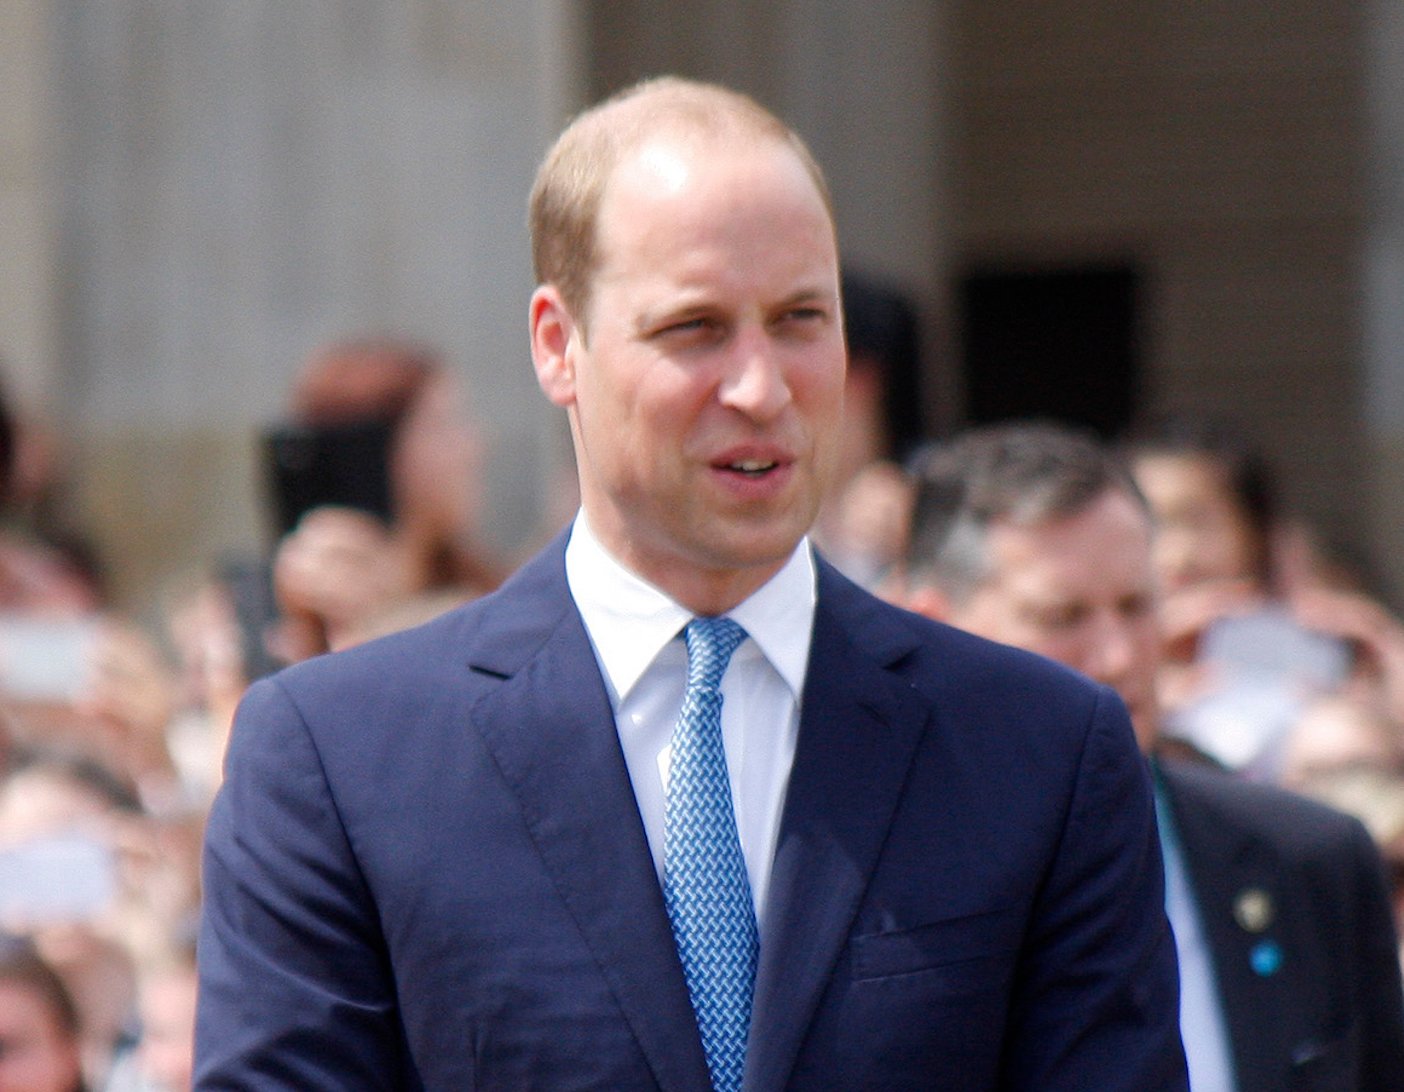 Royal Rumor Claims Prince William Supposedly Crashing Harry’s Latest Project With U.S. Visit